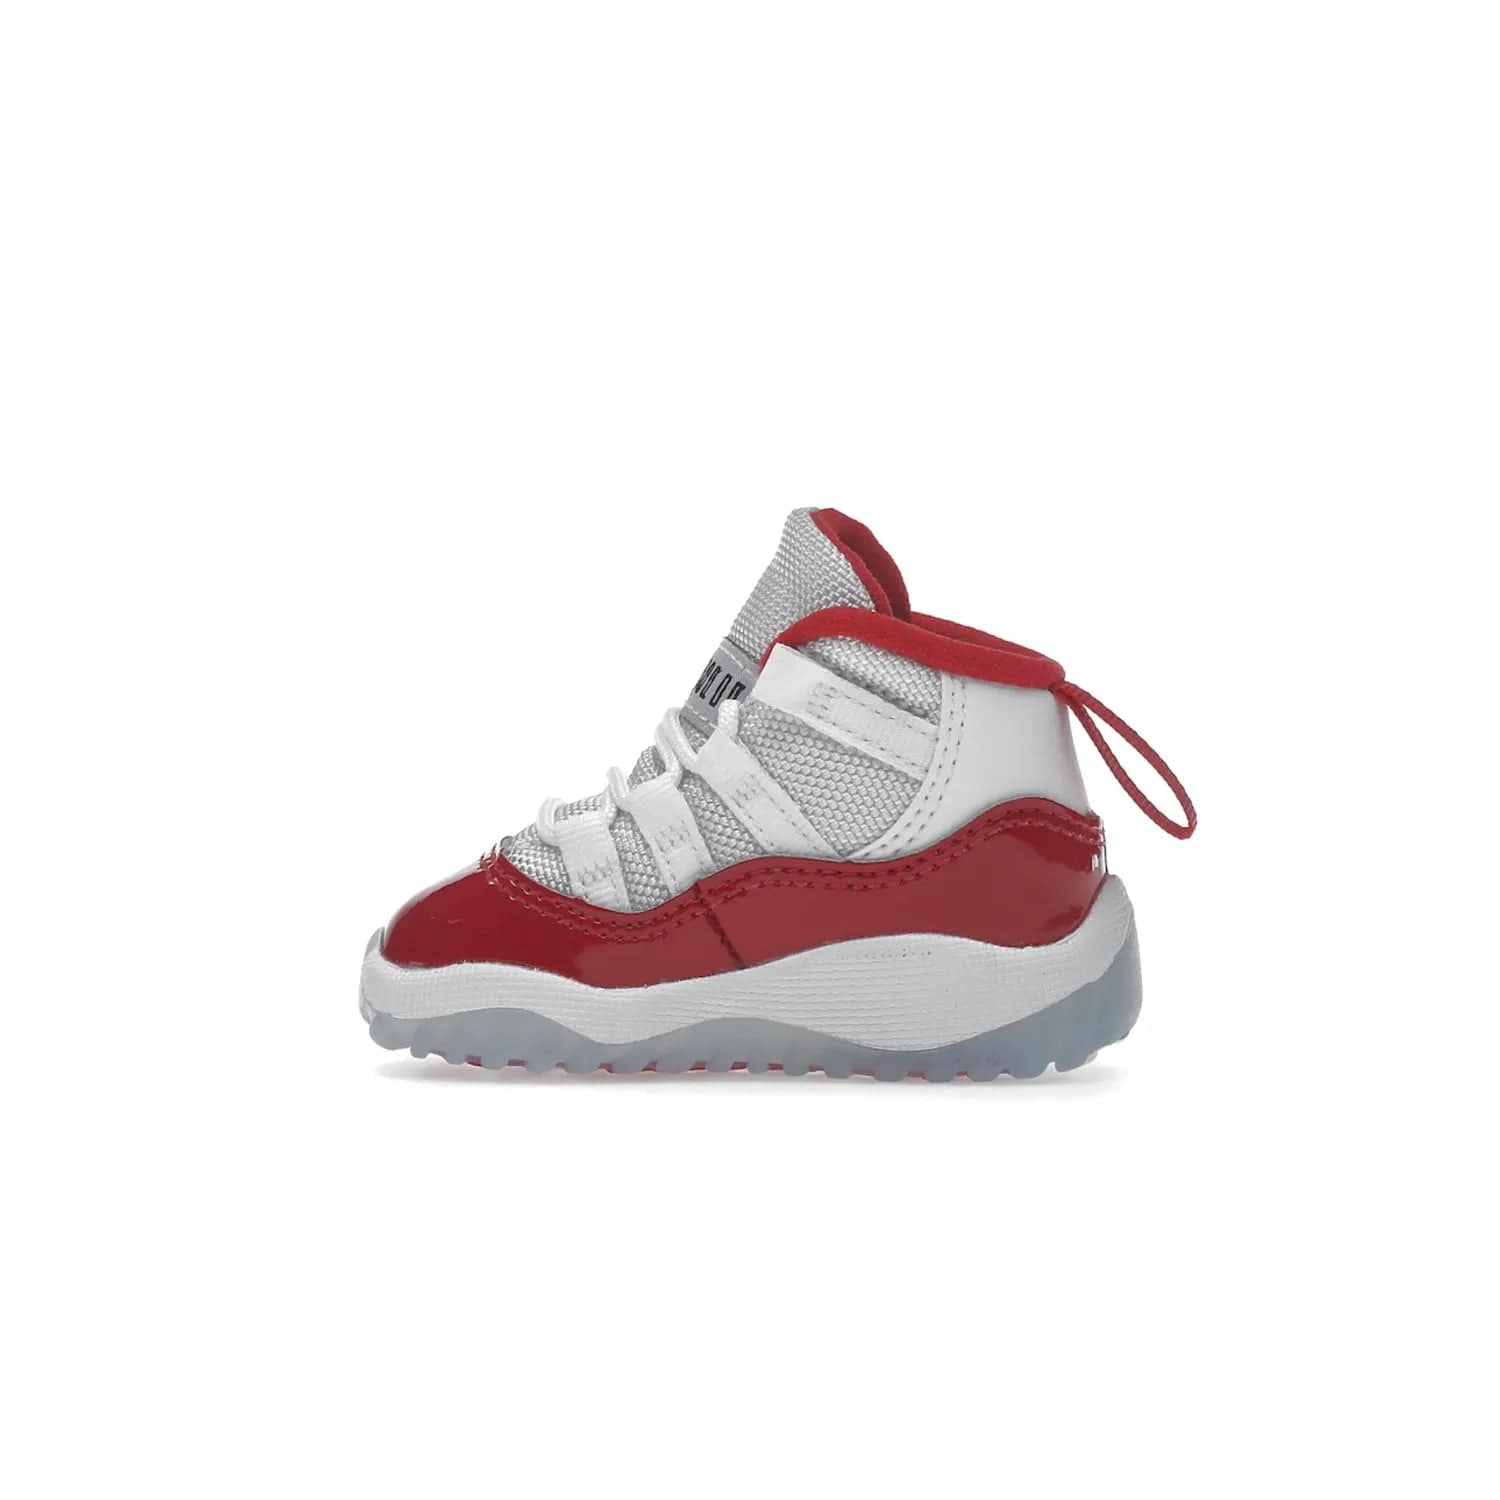 Jordan 11 Retro Cherry (2022) (TD) - Image 20 - Only at www.BallersClubKickz.com - Timeless classic. Air Jordan 11 Retro Cherry 2022 TD combines mesh, leather & suede for a unique look. White upper with varsity red suede. Jumpman logo on collar & tongue. Available Dec 10th, priced at $80.